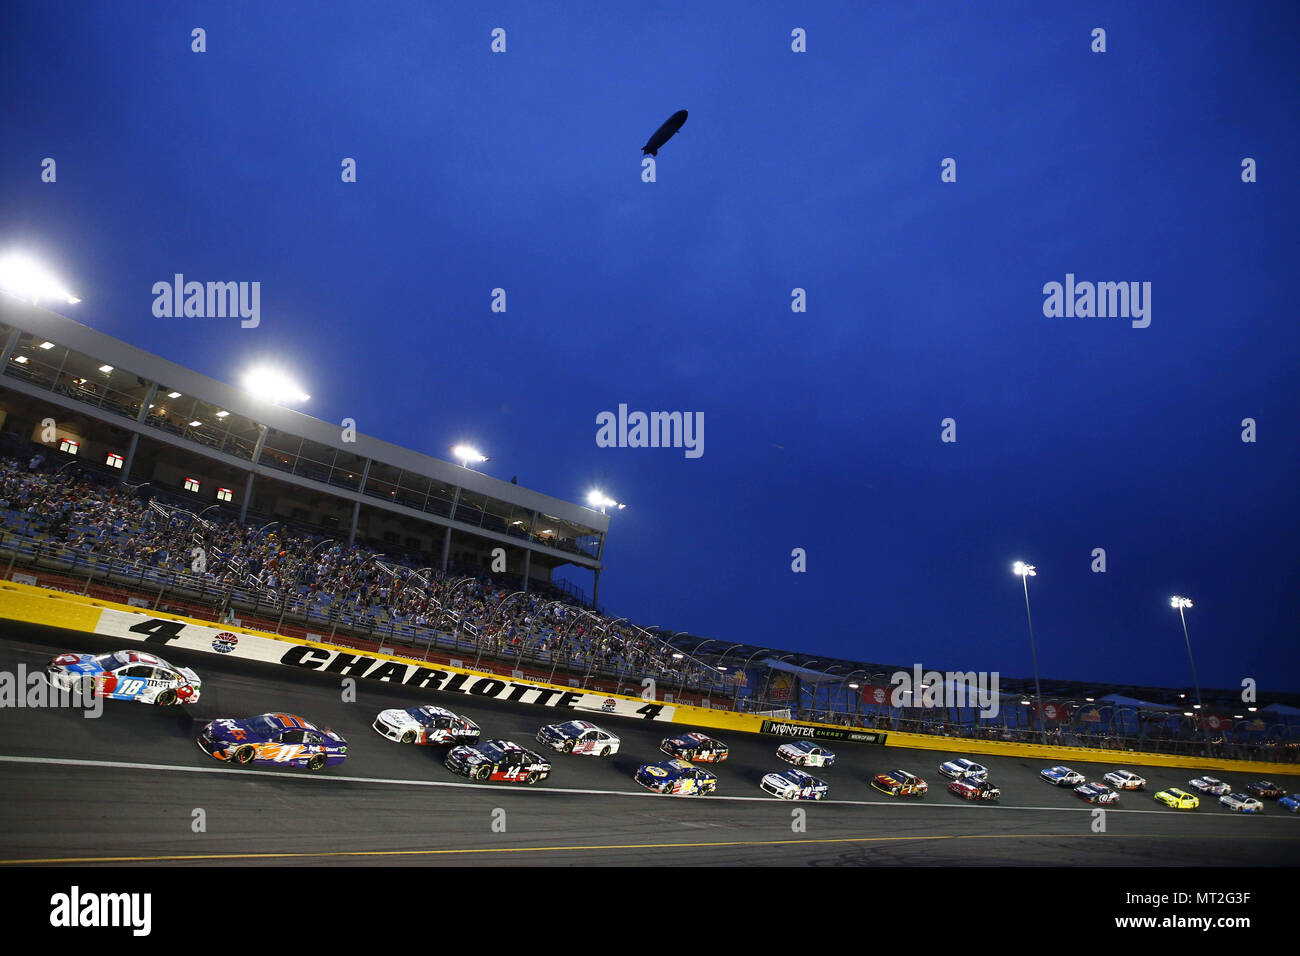 Concord, North Carolina, USA. 27th May, 2018. The Monster Energy NASCAR Cup Series teams race through turn four during the Coca-Cola 600 at Charlotte Motor Speedway in Concord, North Carolina. Credit: Chris Owens Asp Inc/ASP/ZUMA Wire/Alamy Live News Stock Photo